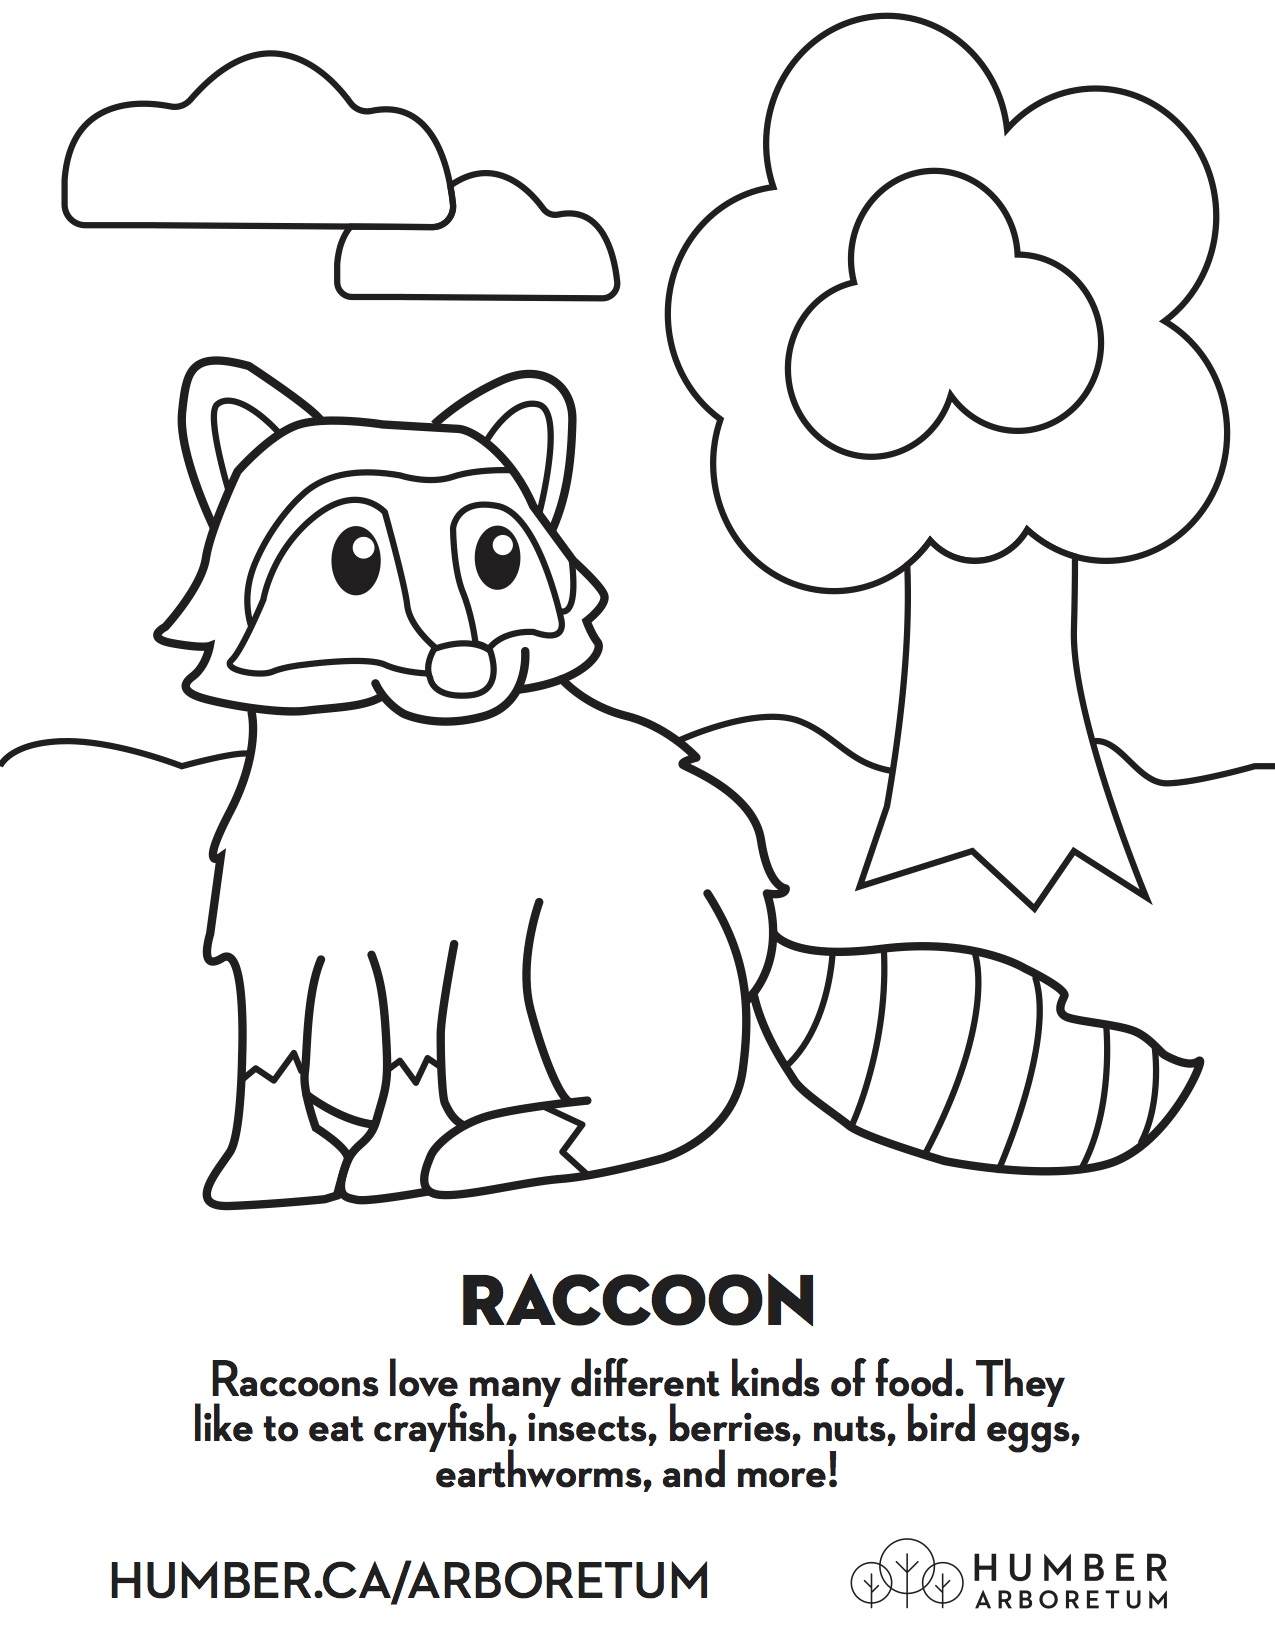 A colouring page with a cartoon raccoon